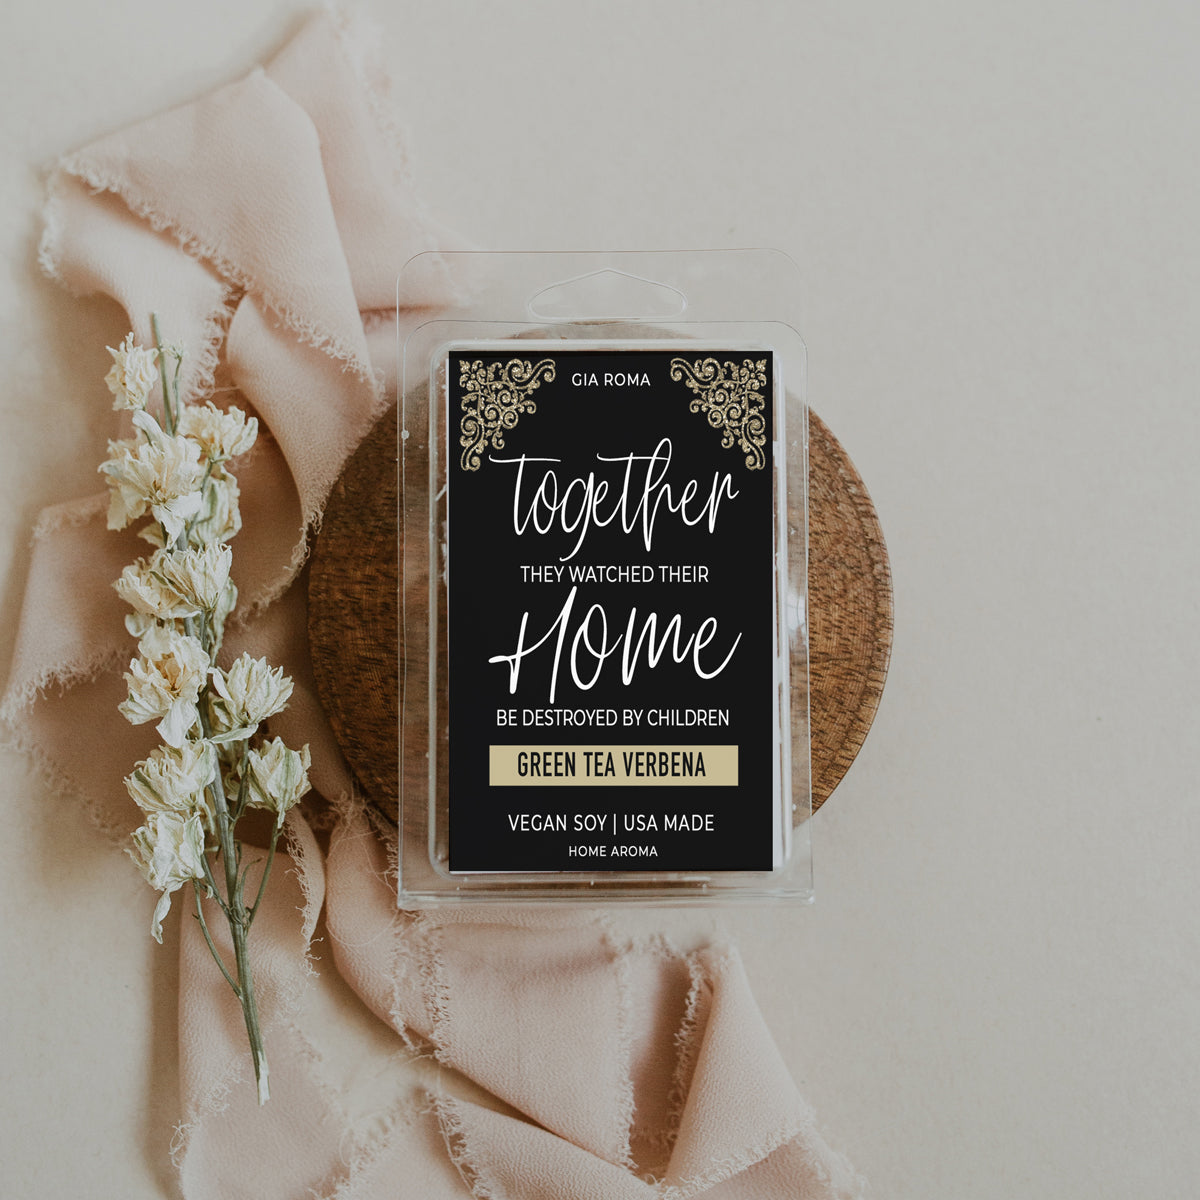 Funny gifts for parents that are cheap - green tea wax melts